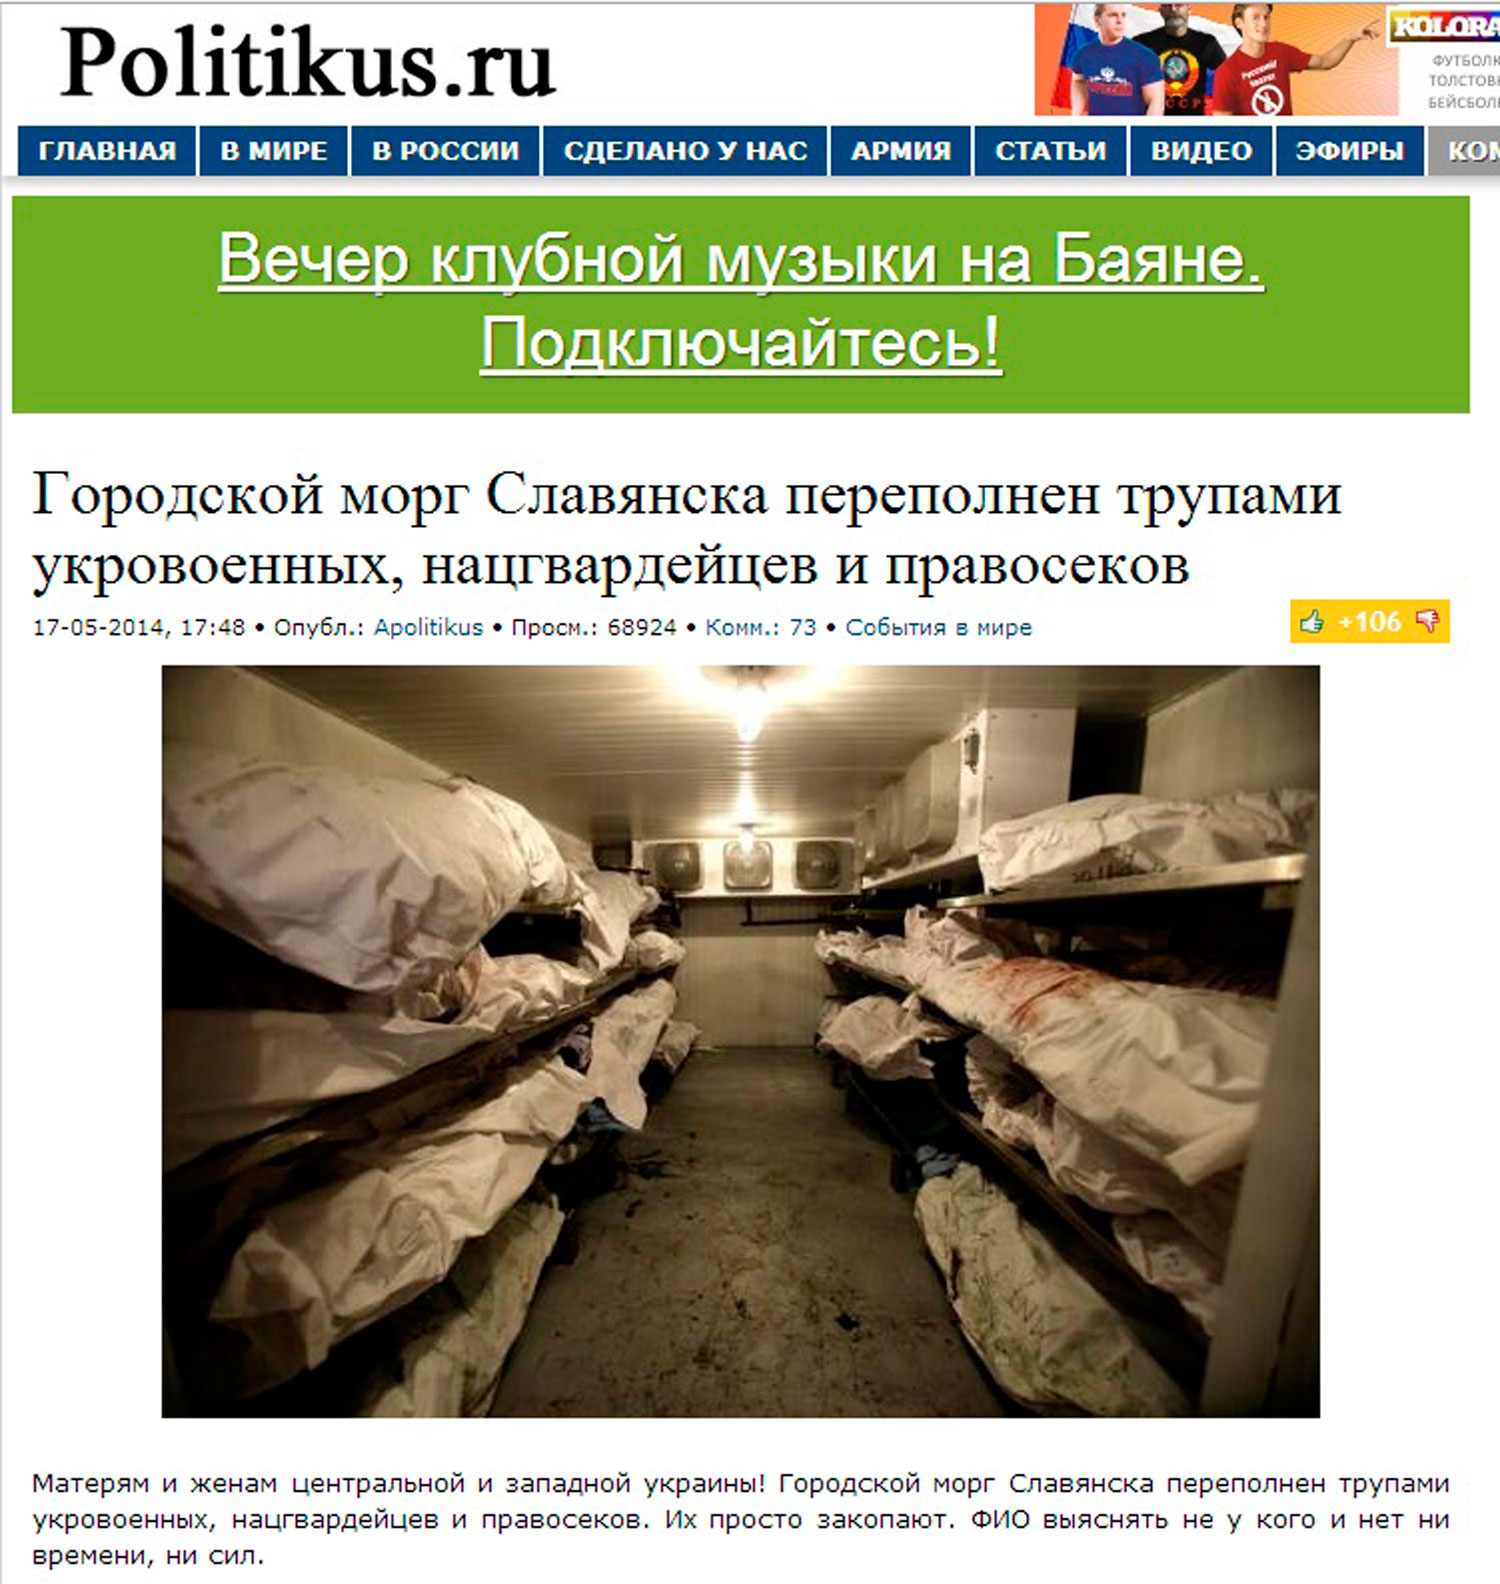 This photo published on politikus.ru claimed to show a morgue in Sloviansk overstocked with bodies of Ukrainian militants and National Guardsmen who were going to be buried as unidentified.